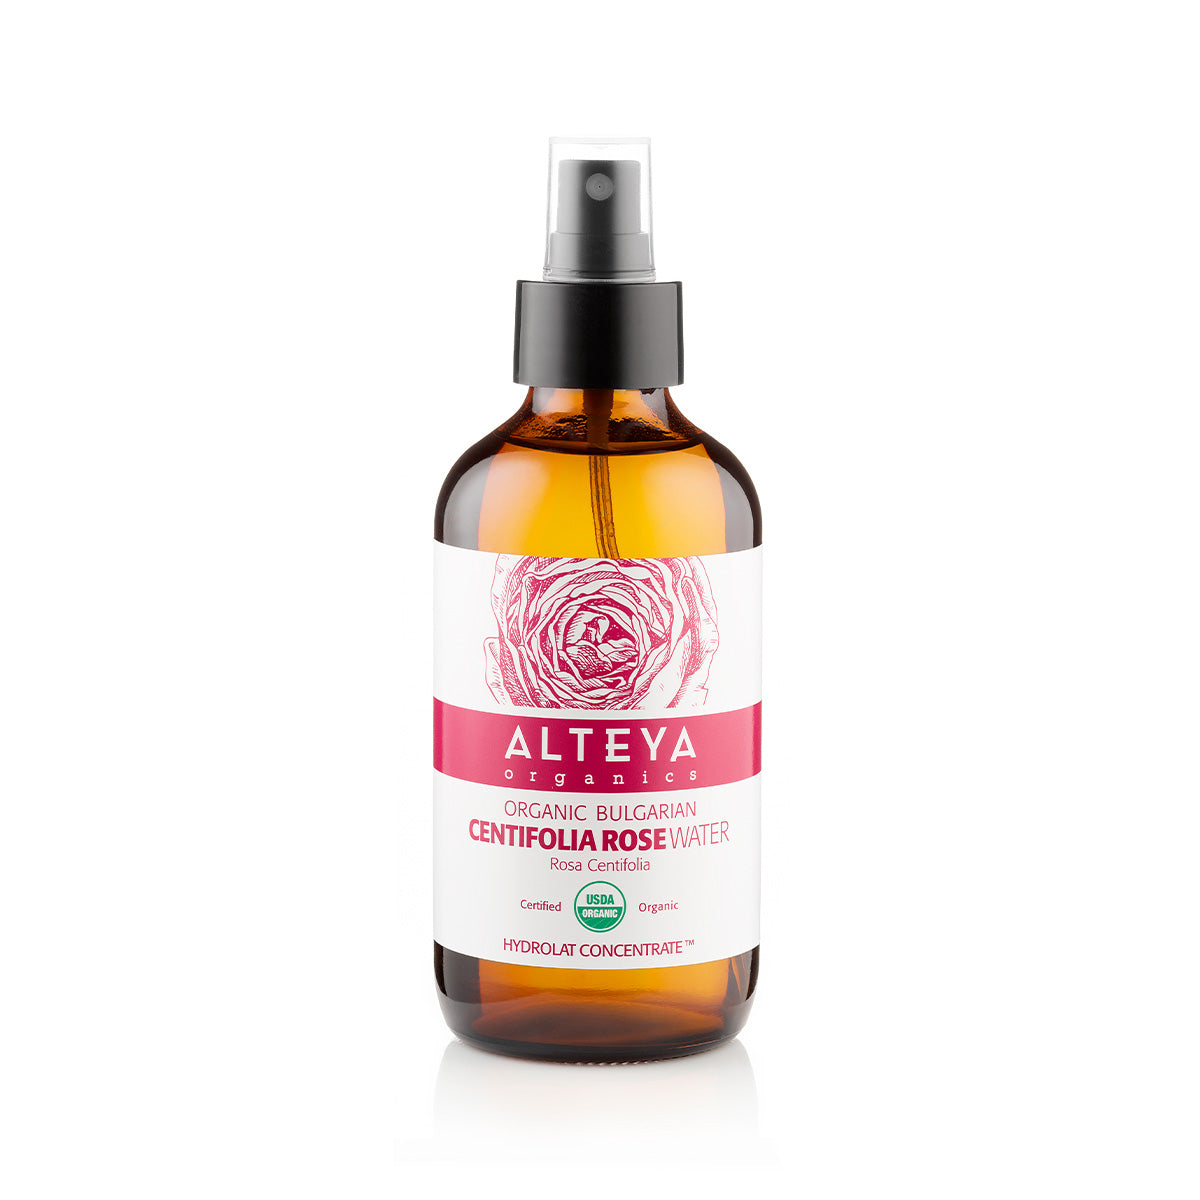 An aromatic bottle of Bulgarian Organic Centifolia Rose Water – Amber Glass Bottle infused with Alteya Organics rose water.